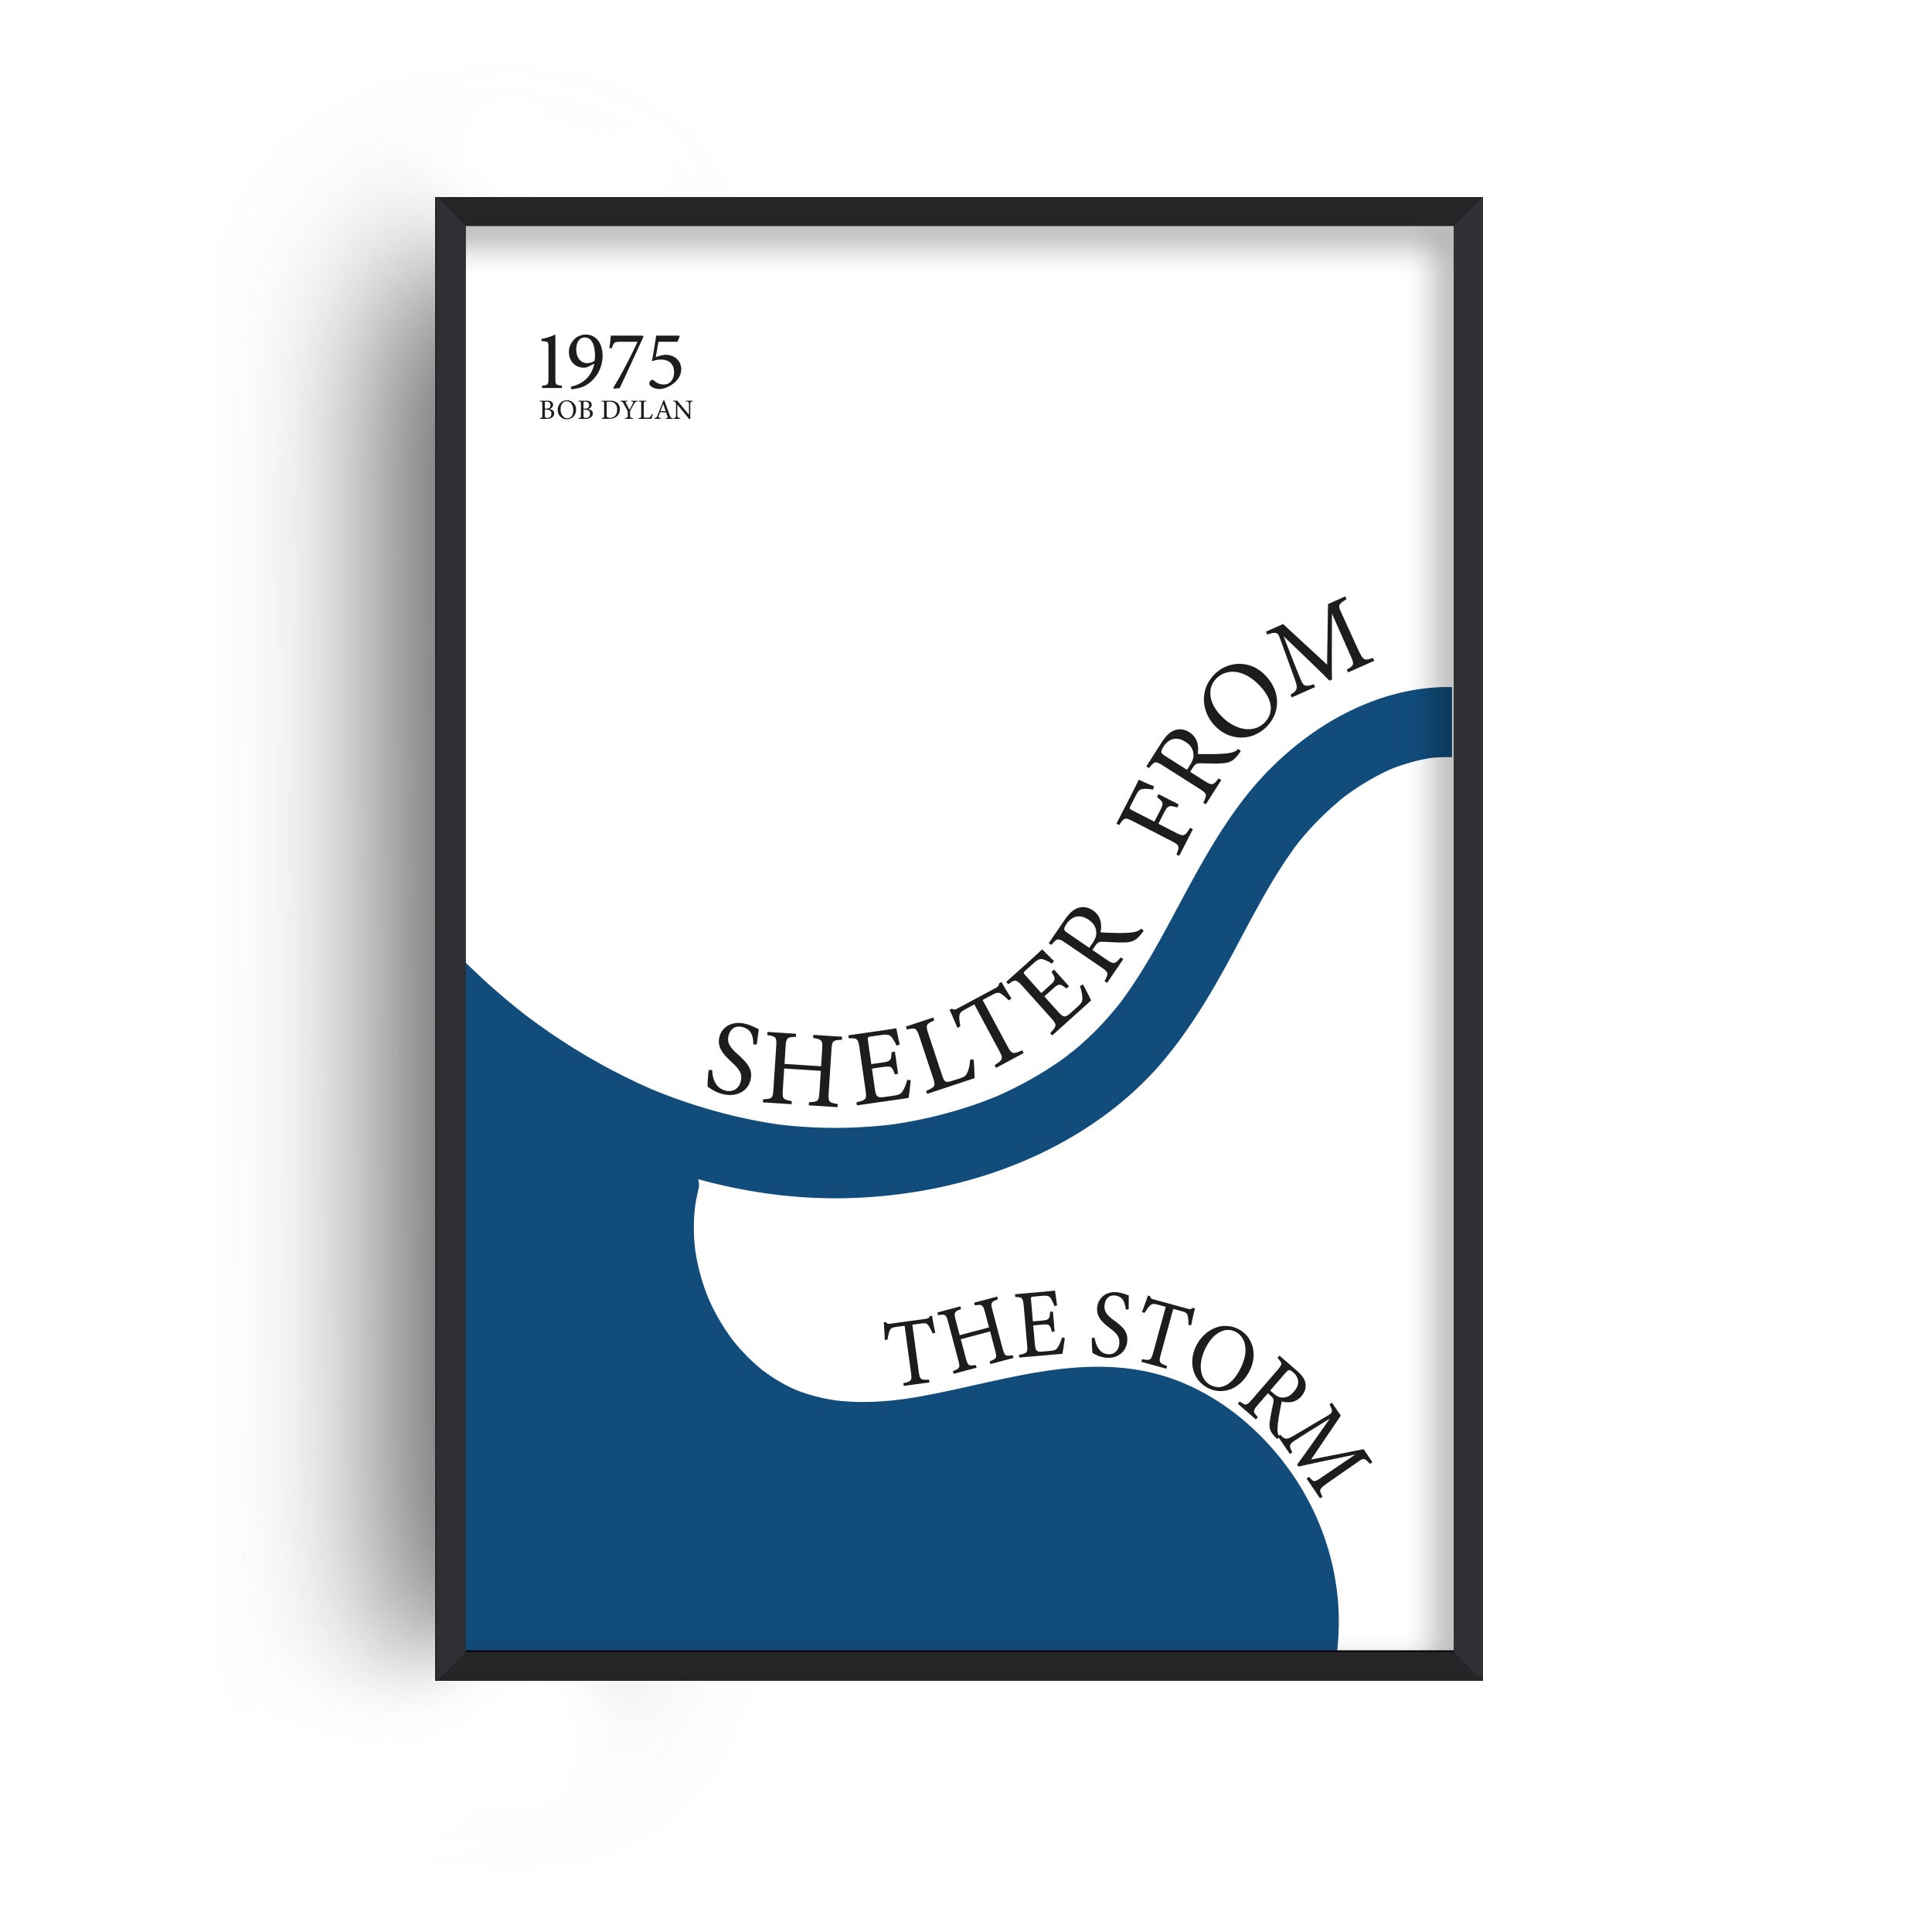 Shelter from the storm Giclée retro Art Print